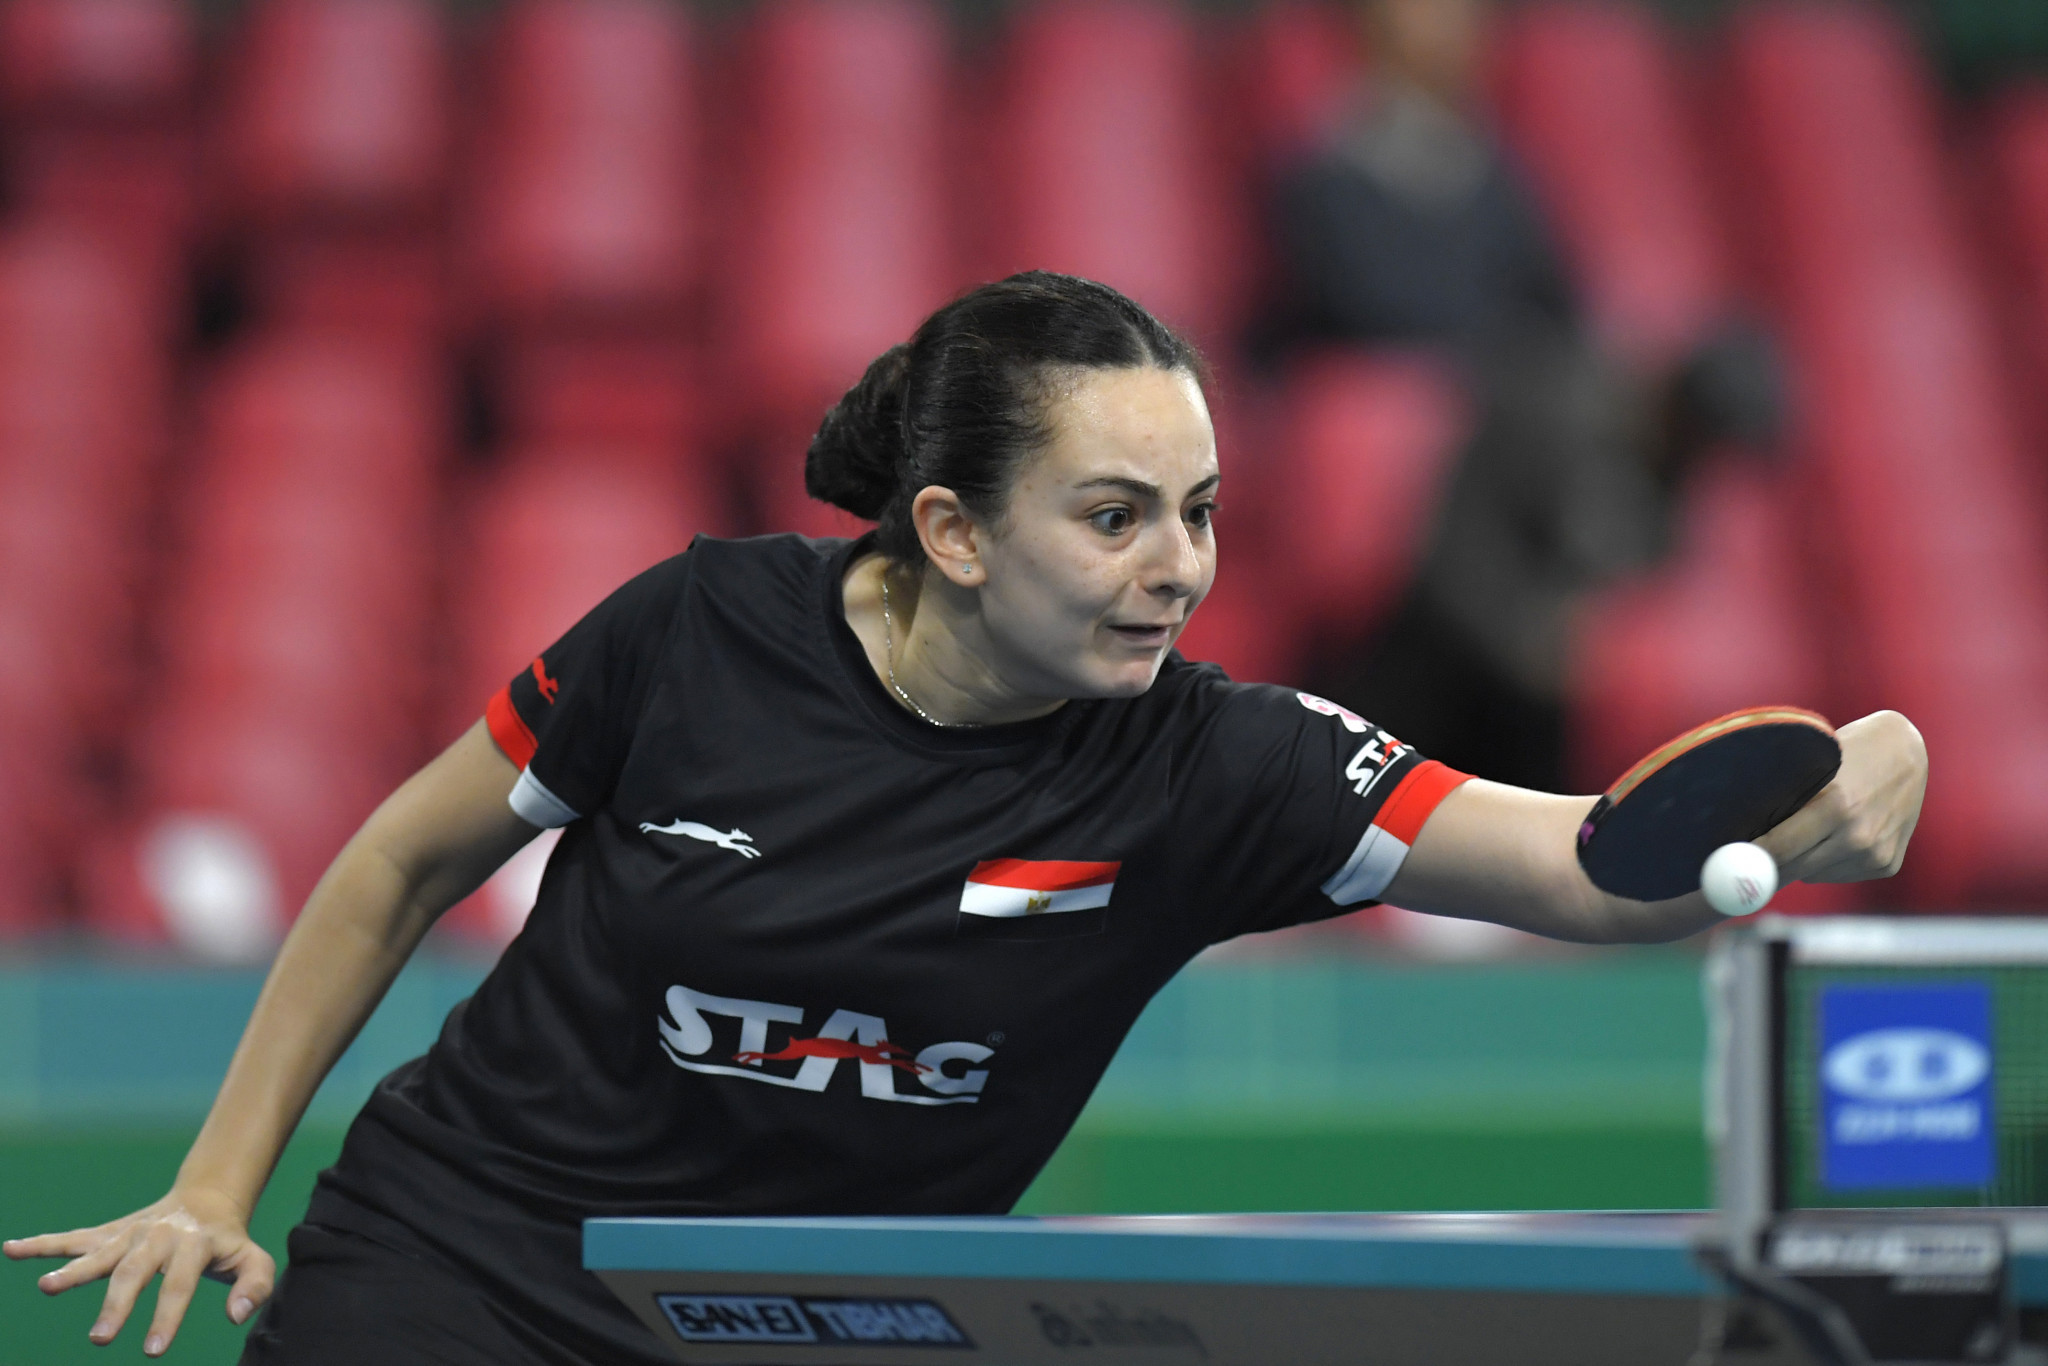 Defending champion Meshref starts strongly at ITTF Africa Top 16 Cup